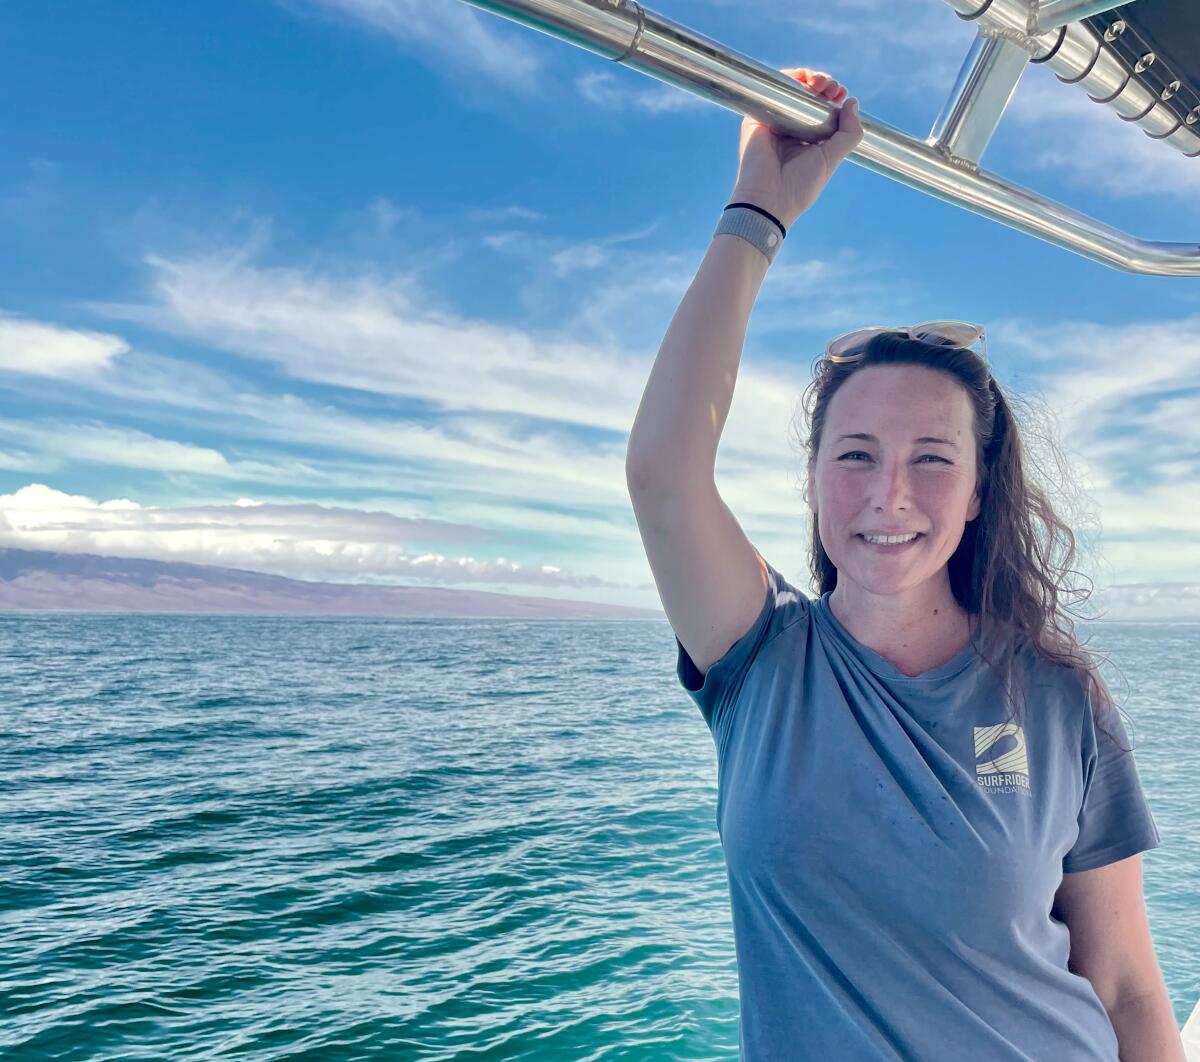 Stefanie Sekich-Quinn is an advocate for climate change policies as part of a local chapter of the Surfrider Foundation.